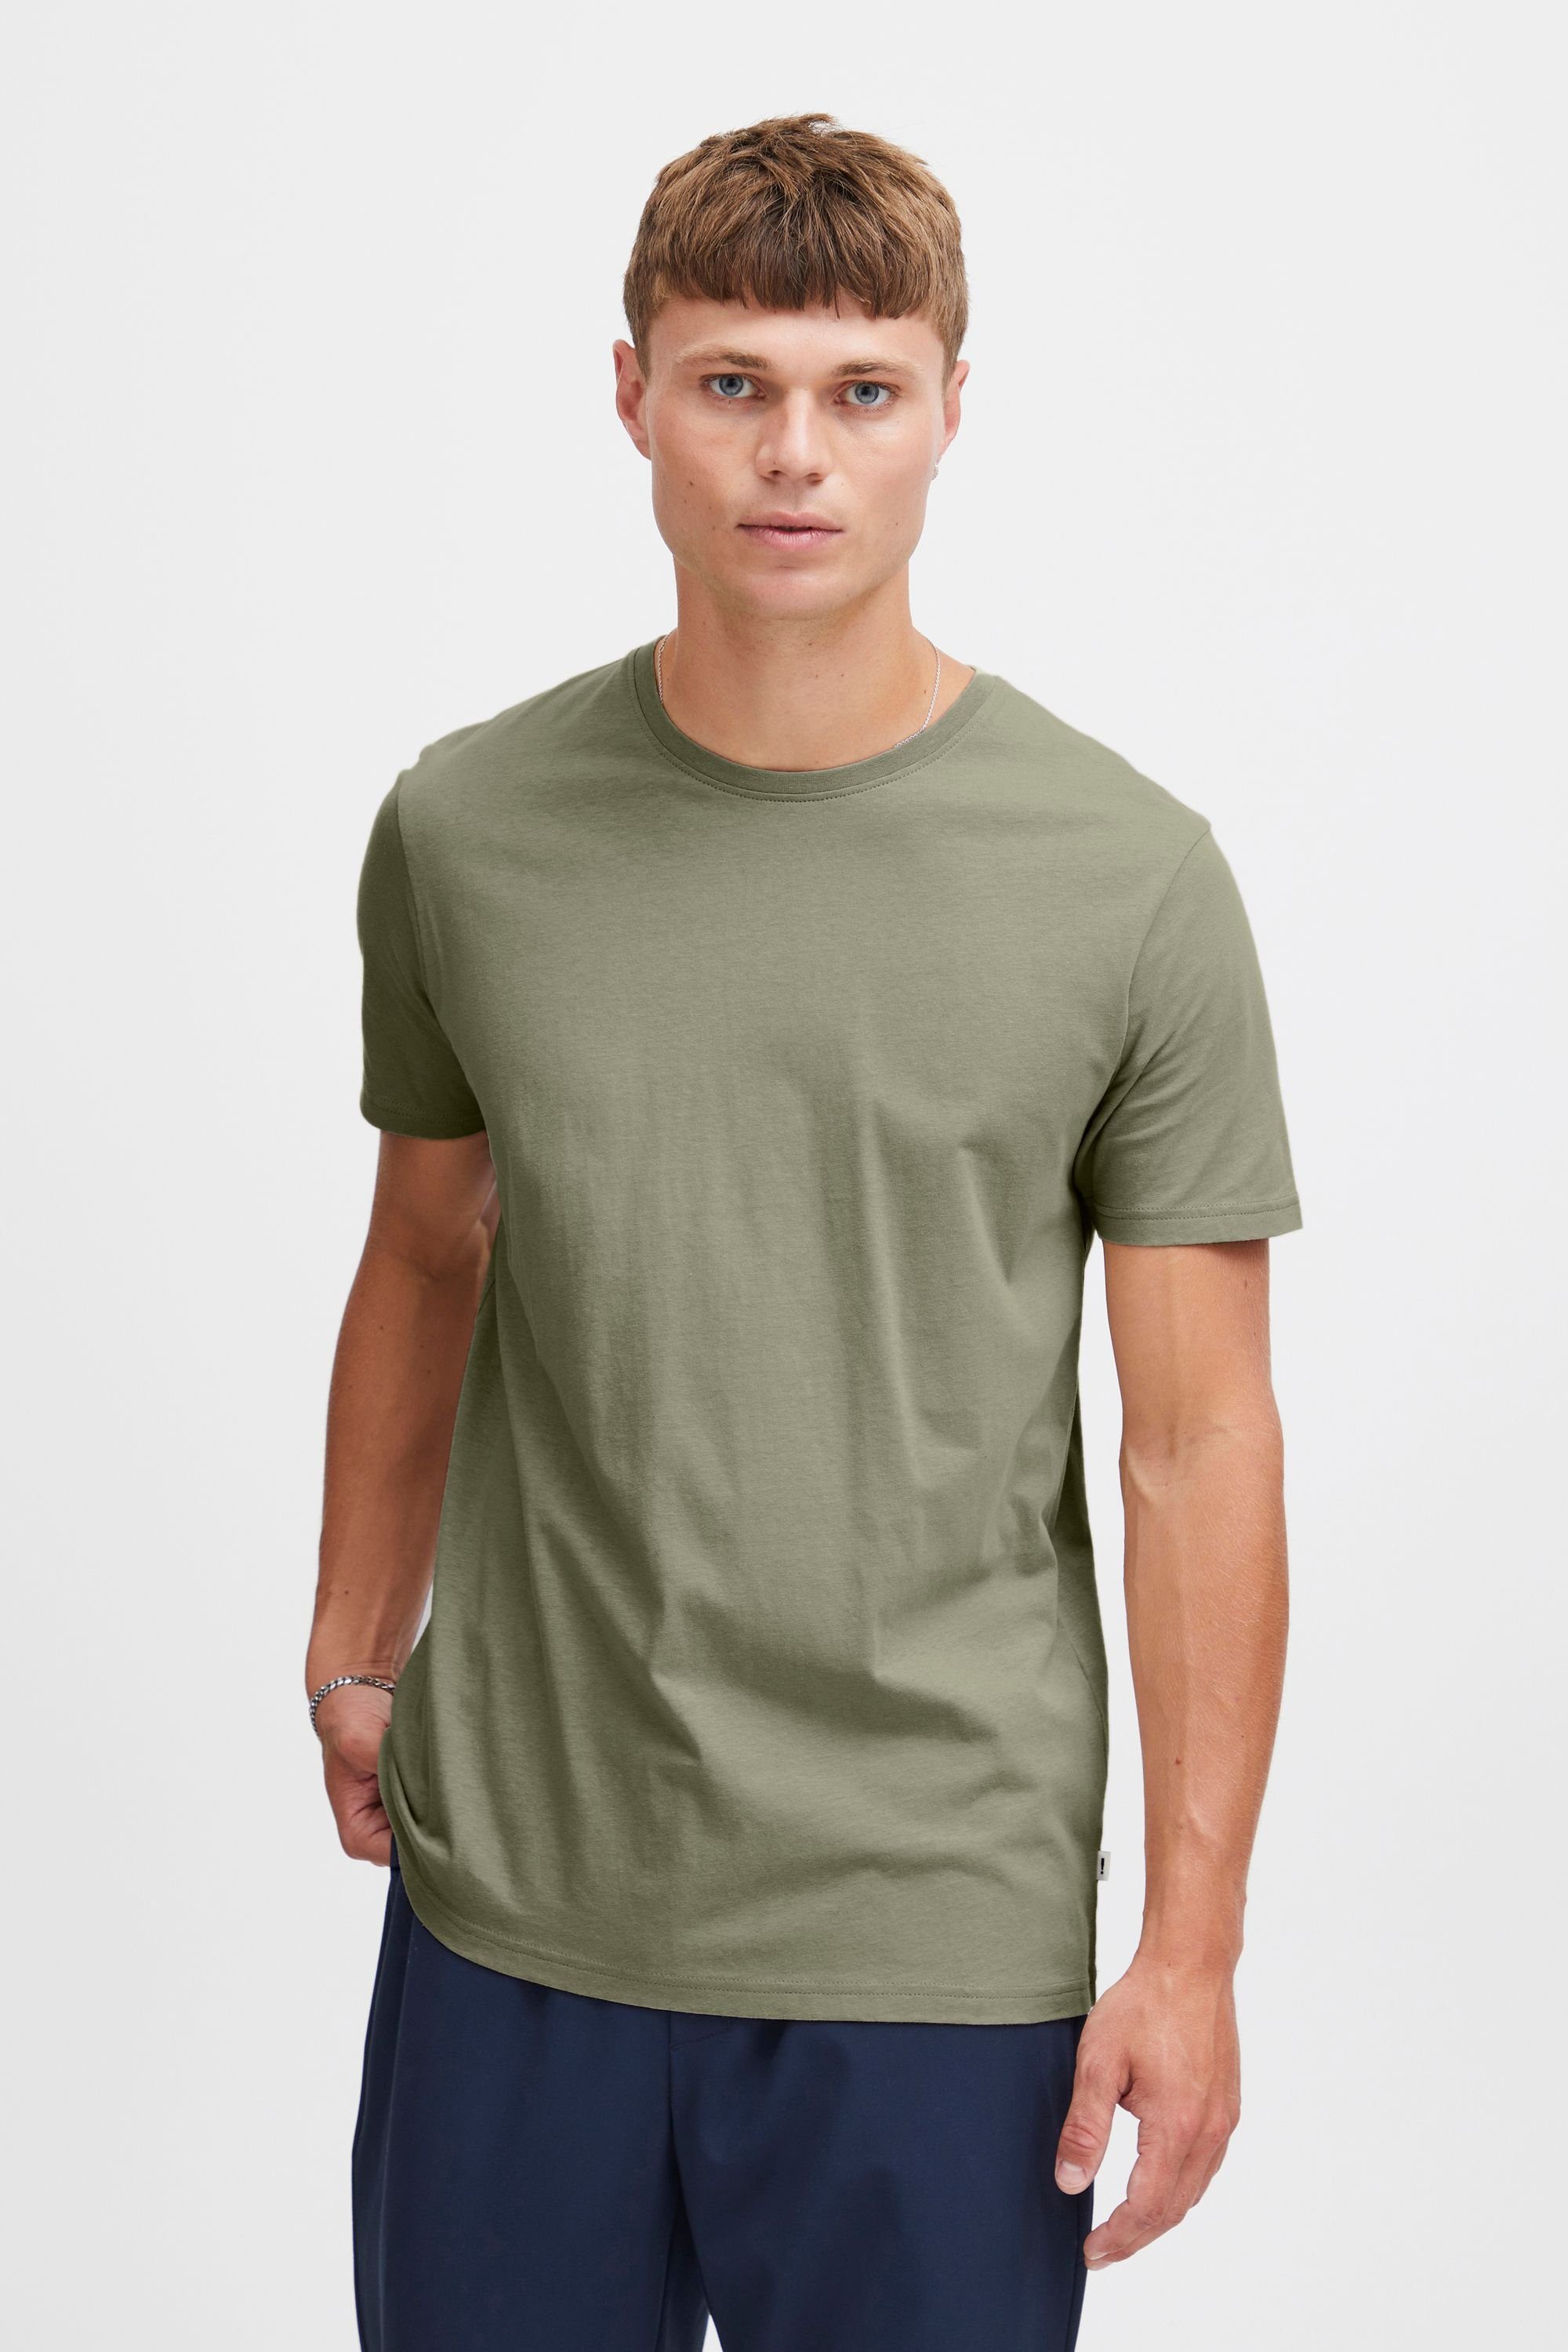 !Solid T-Shirt 6194761, Tee - Rock SS - 21103651 Vetiver (170613)